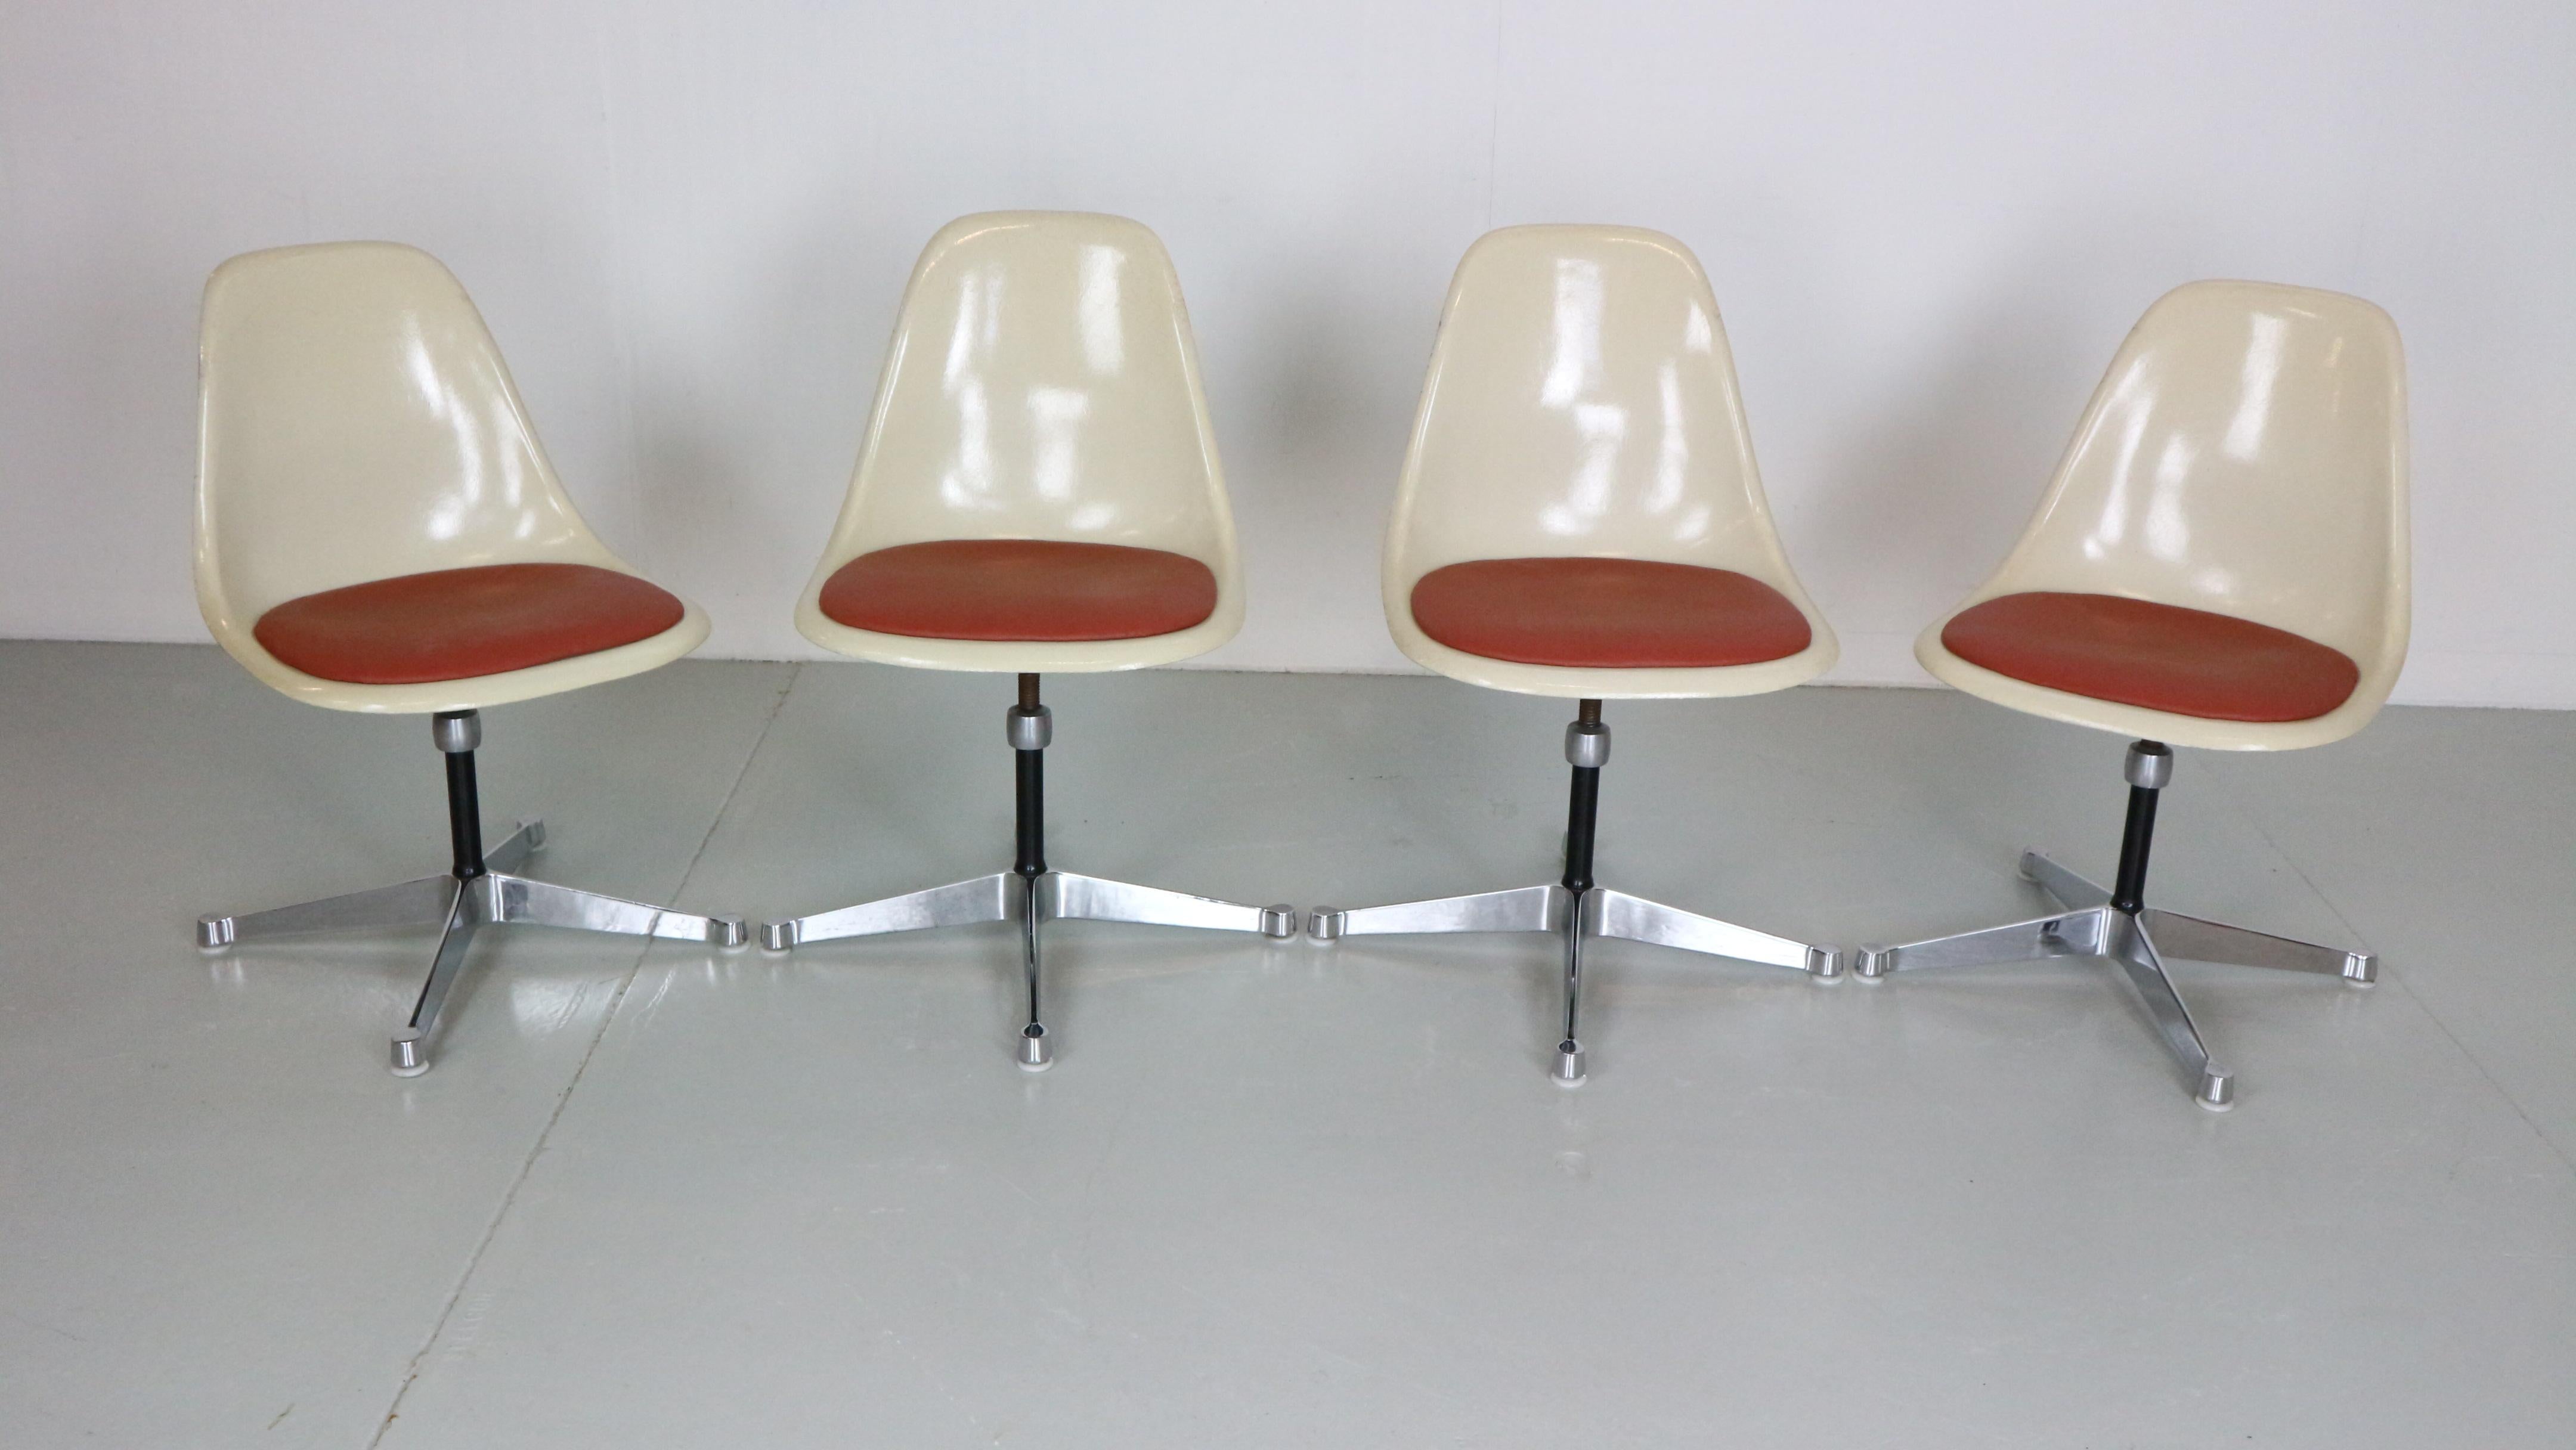 Set of 4 chairs designed by Charles& Ray Eames and manufactured for Herman Miller in 1960's circa, United States.

Chairs are in original condition. Marked under the base.
Made of fibreglass with seating cushions which were newly reupholstered in